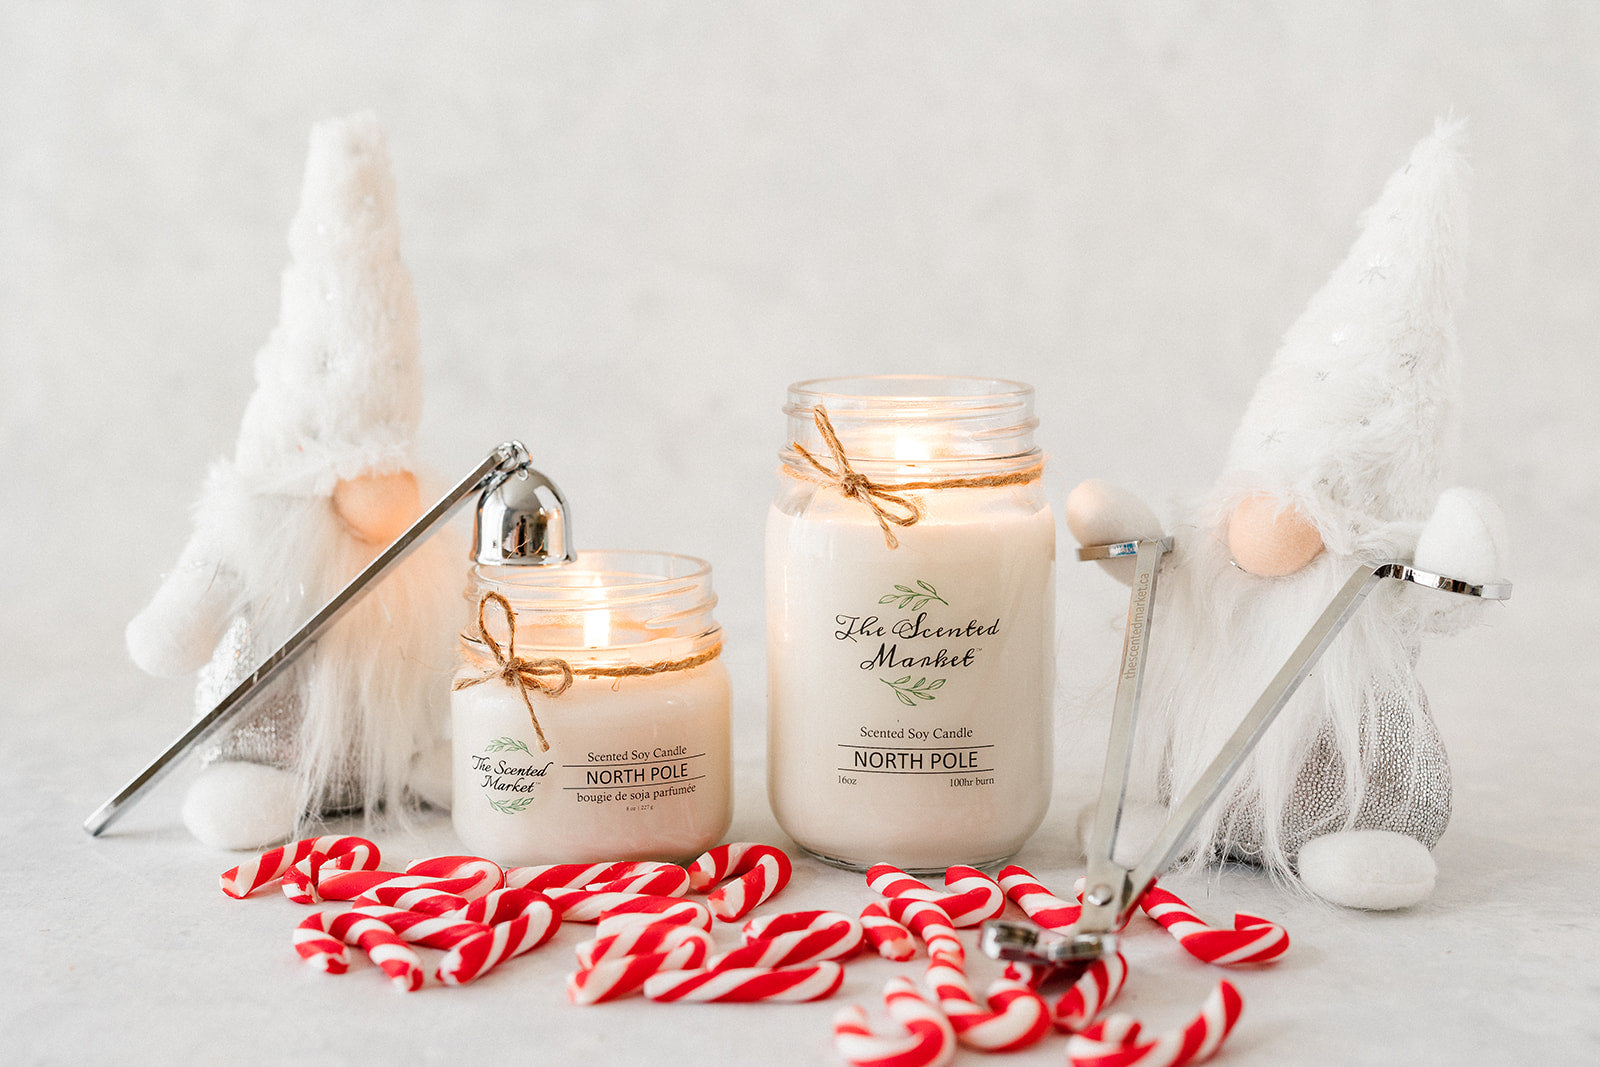 Stocking Stuffers You'll Love for $9.99 & Under – The Scented Market